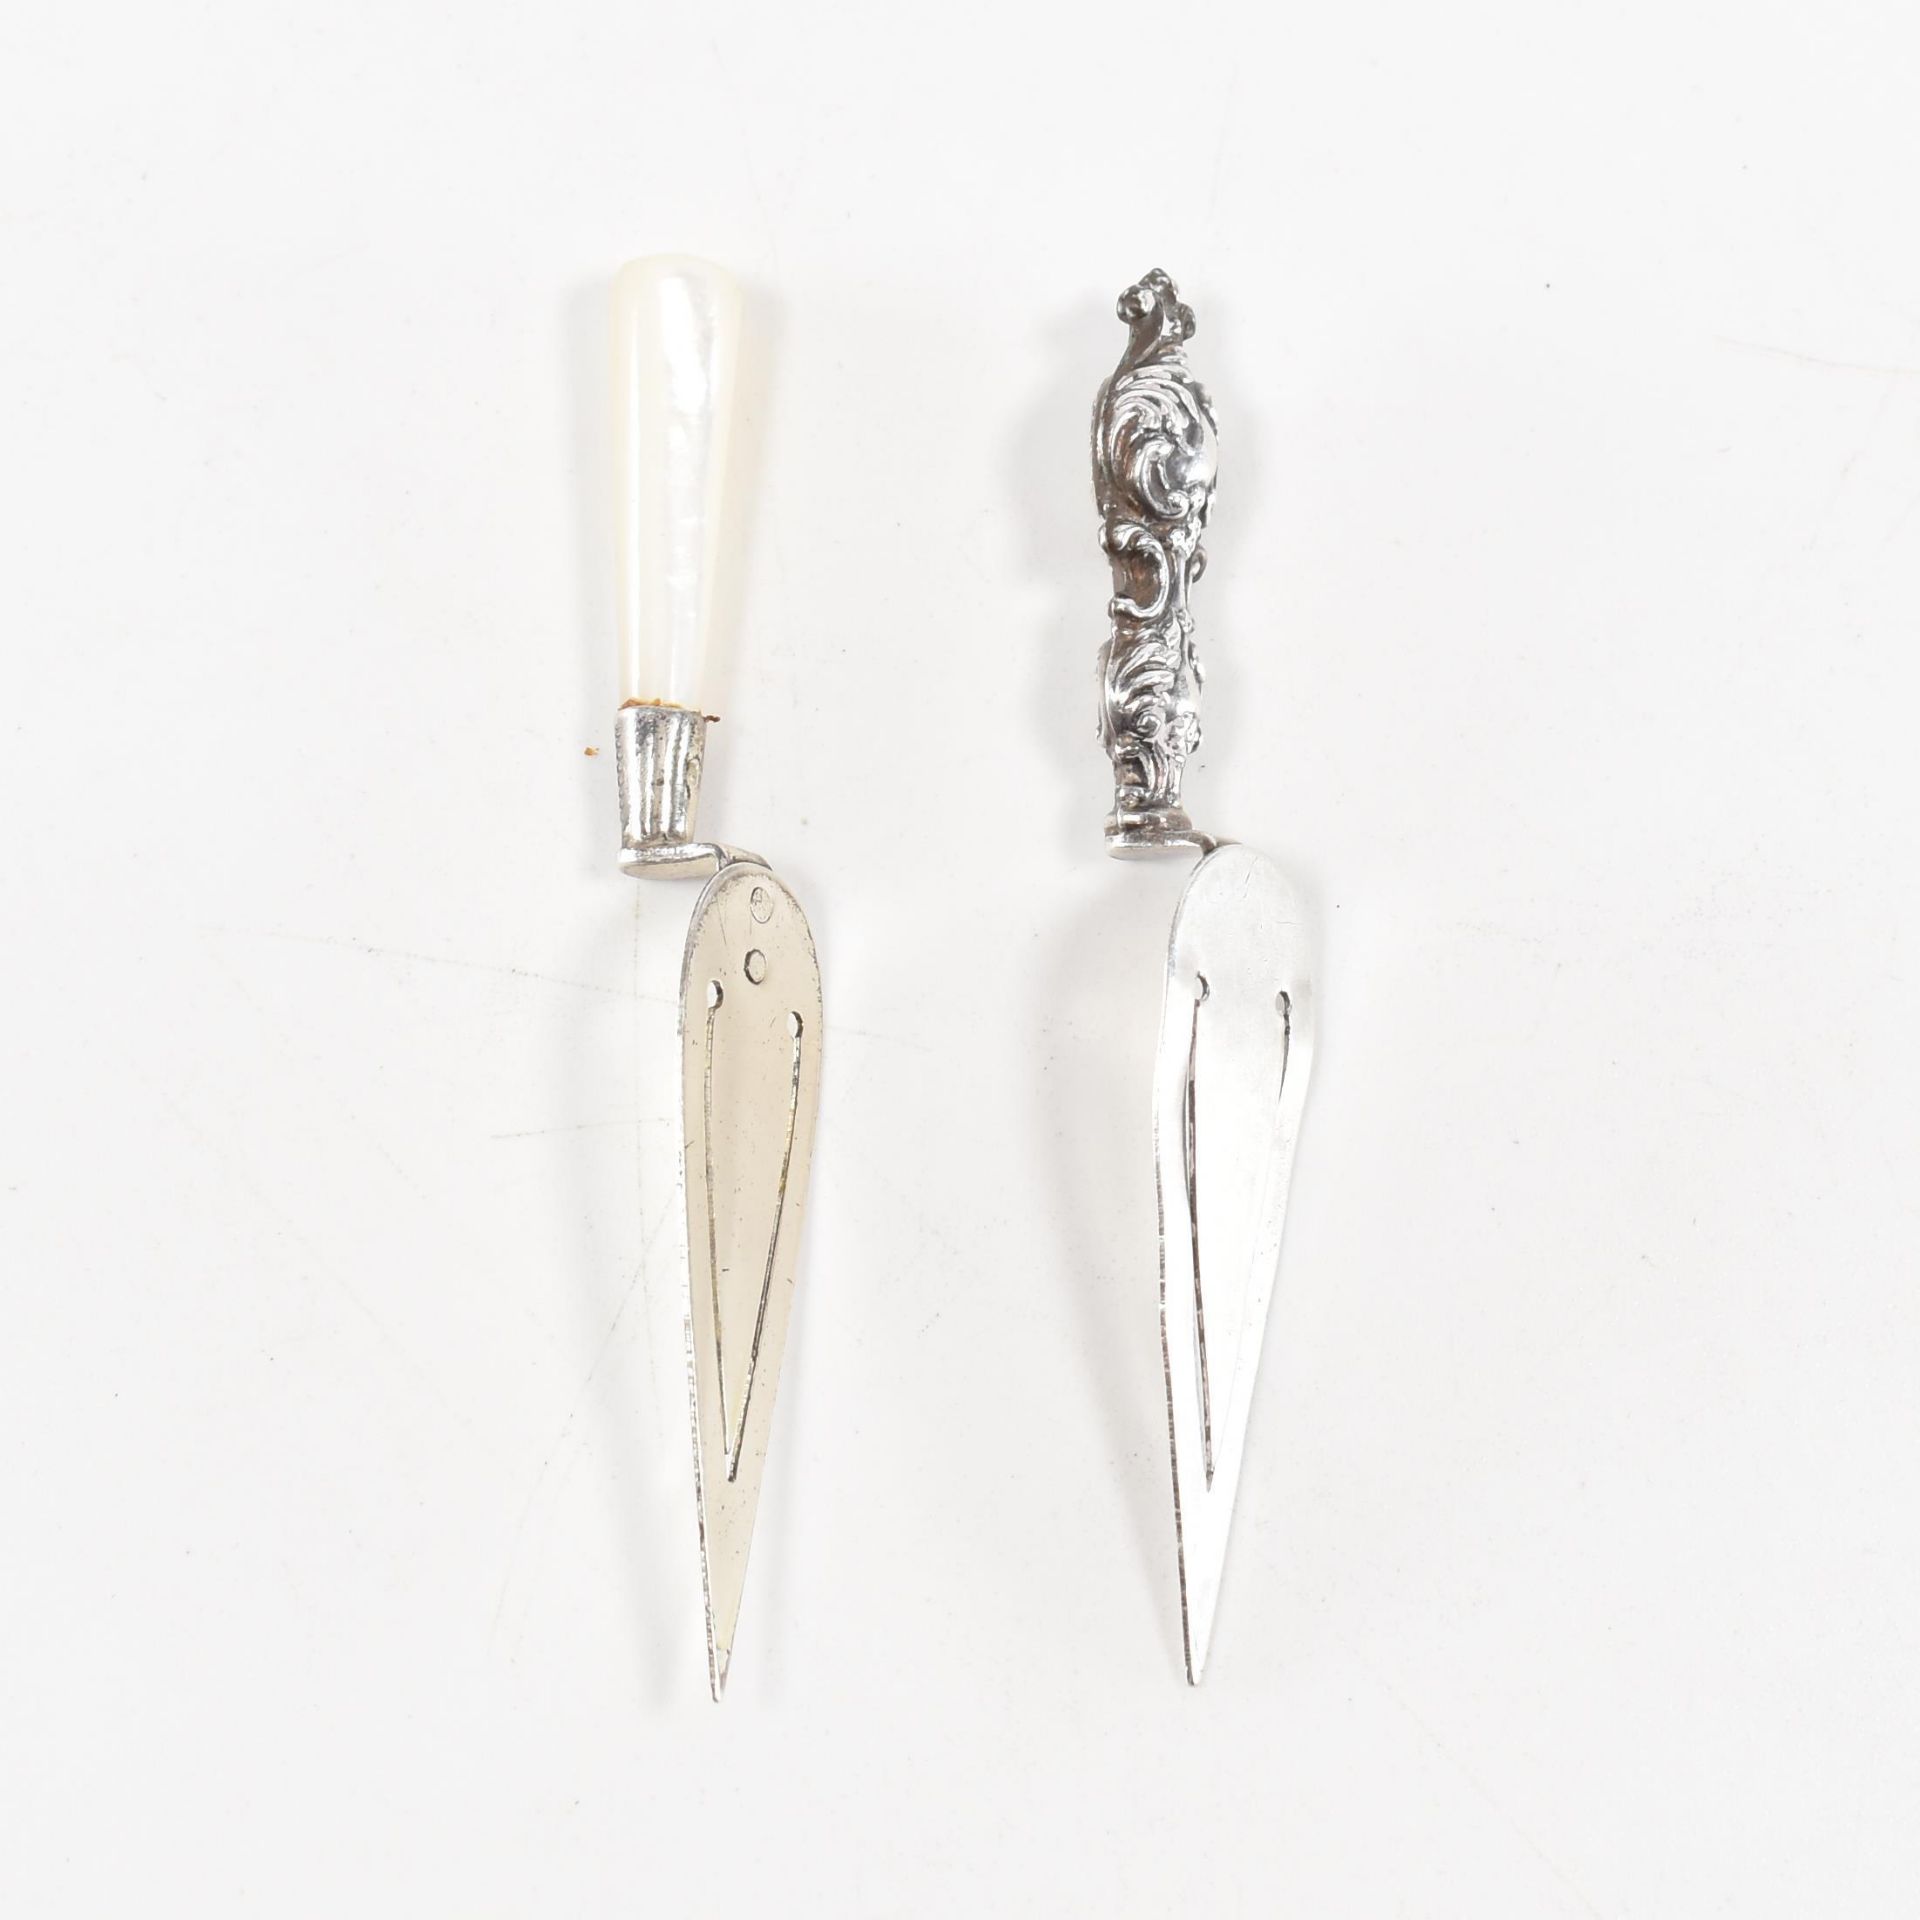 TWO SILVER MID CENTURY BOOKMARKS IN THE SHAPE OF A TROWEL - Image 2 of 4